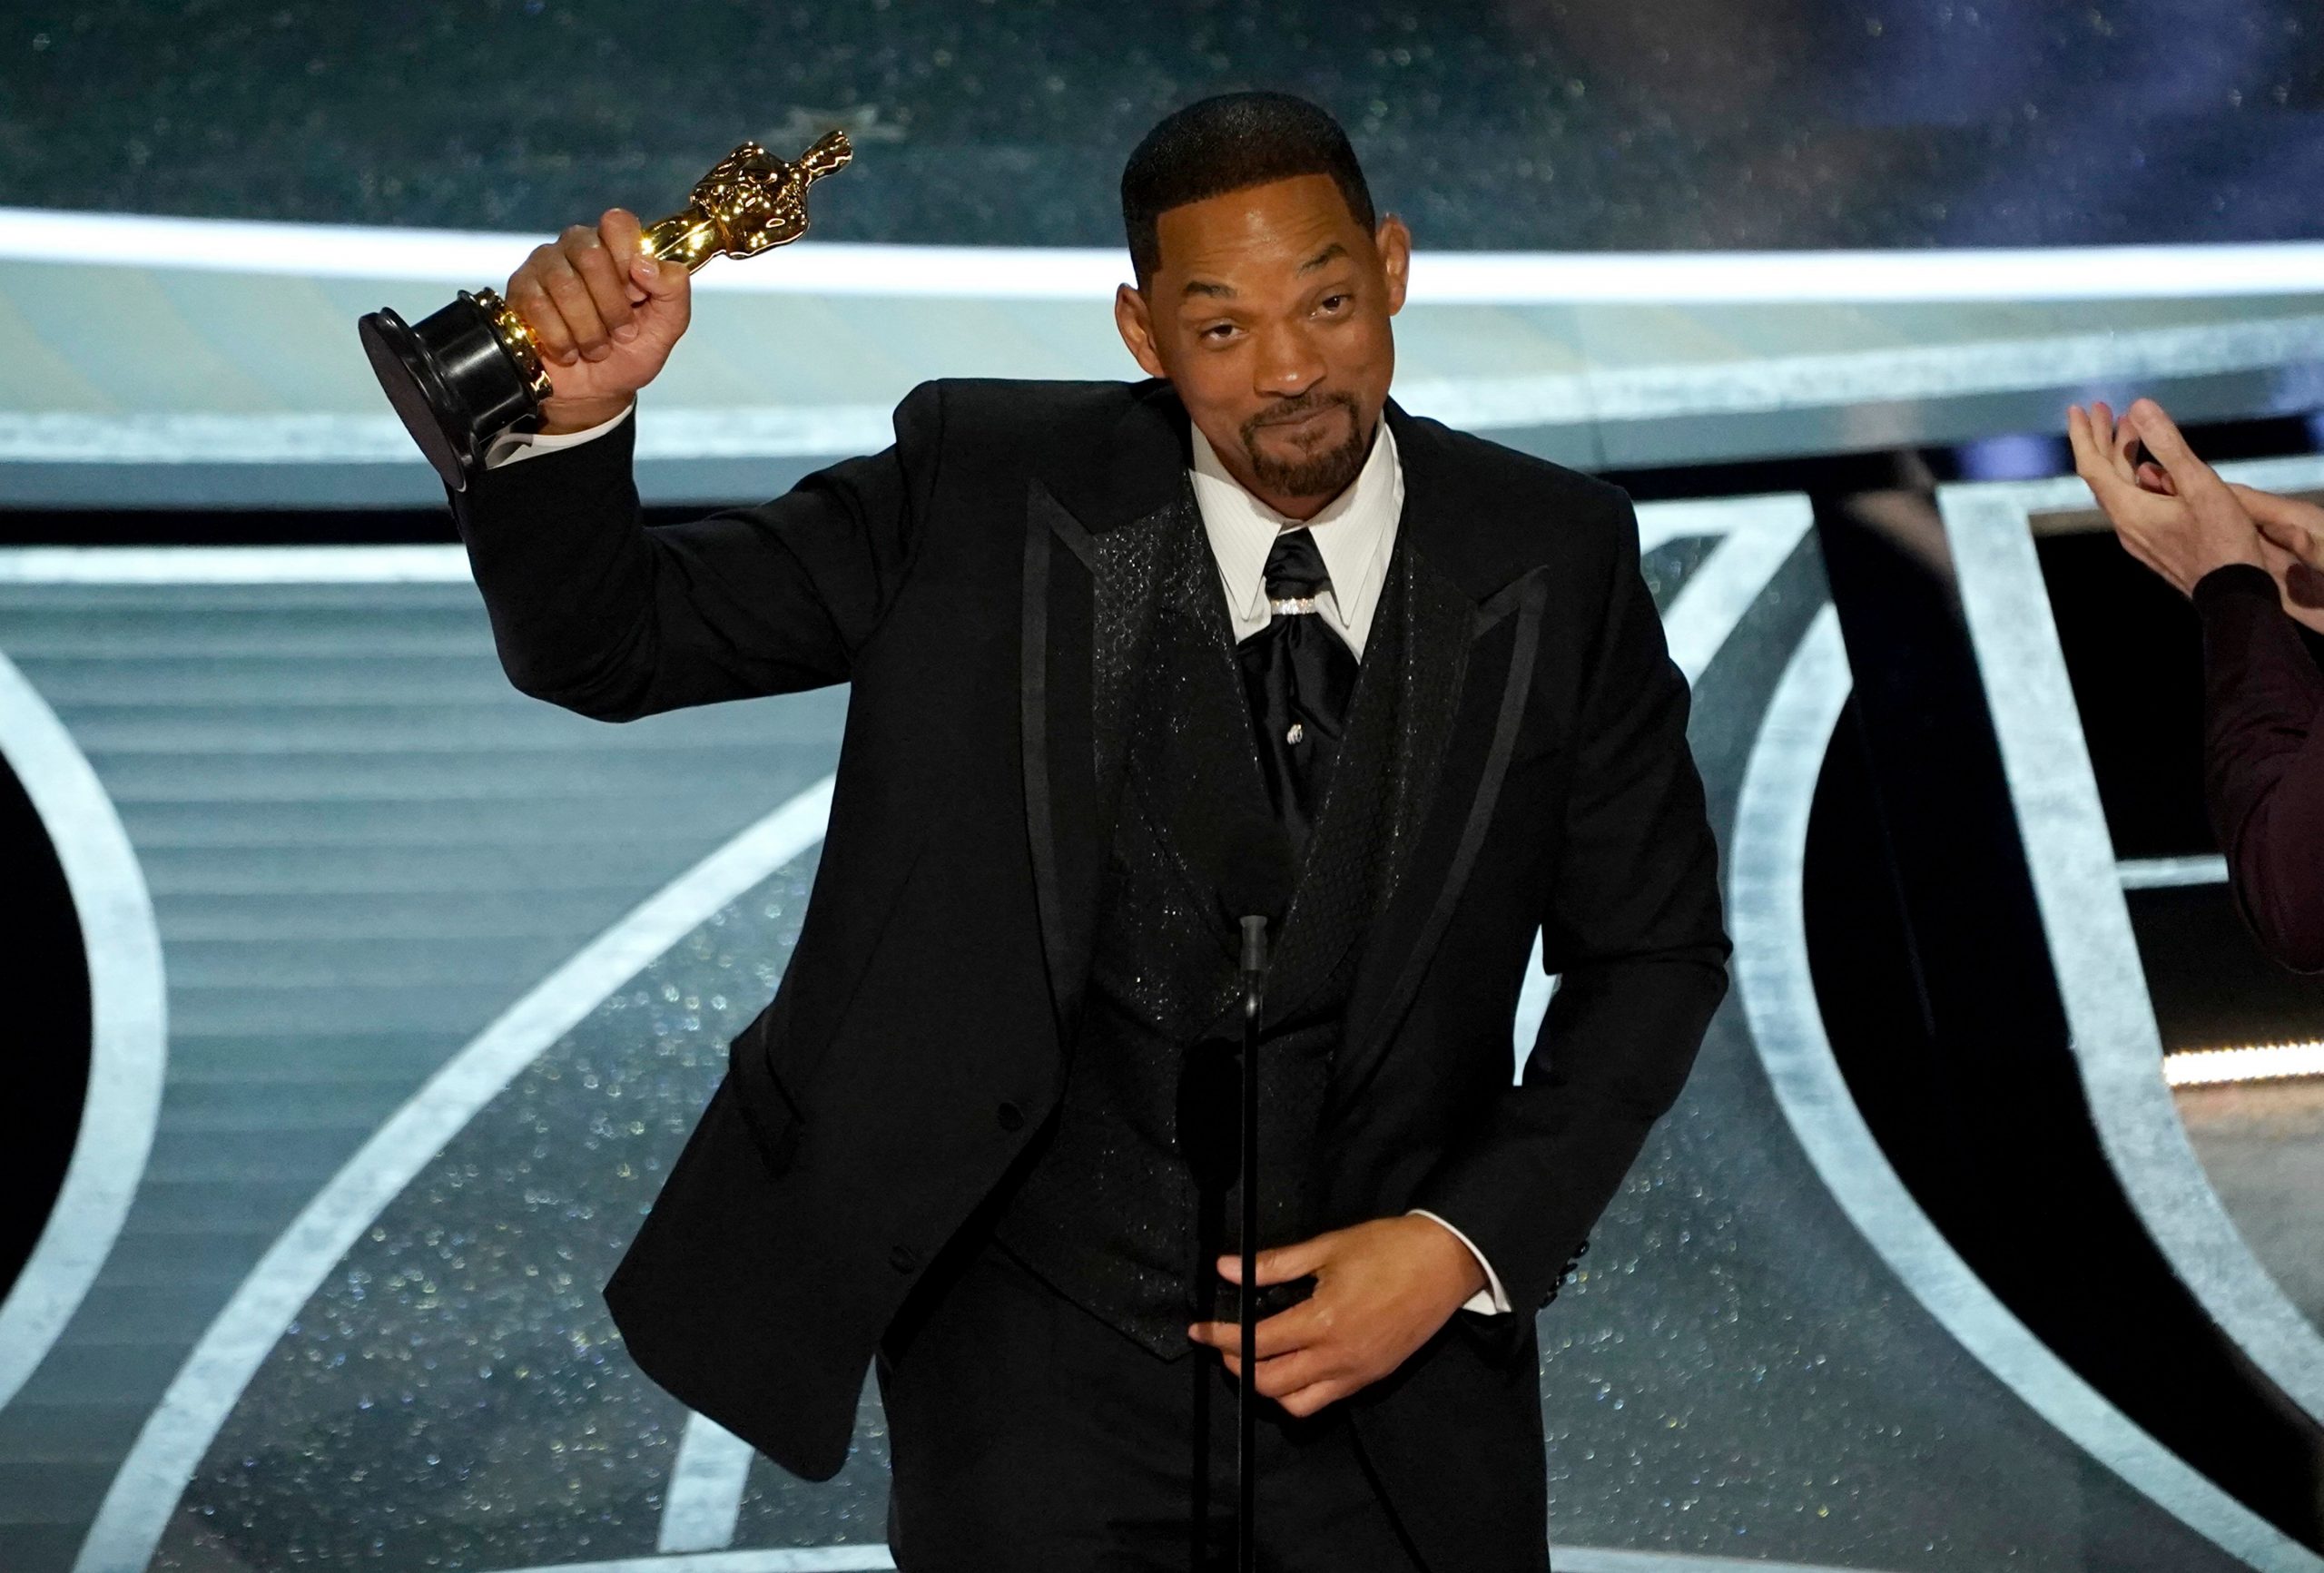 History of violence? Will Smith was arrested in the 80s for vicious assault